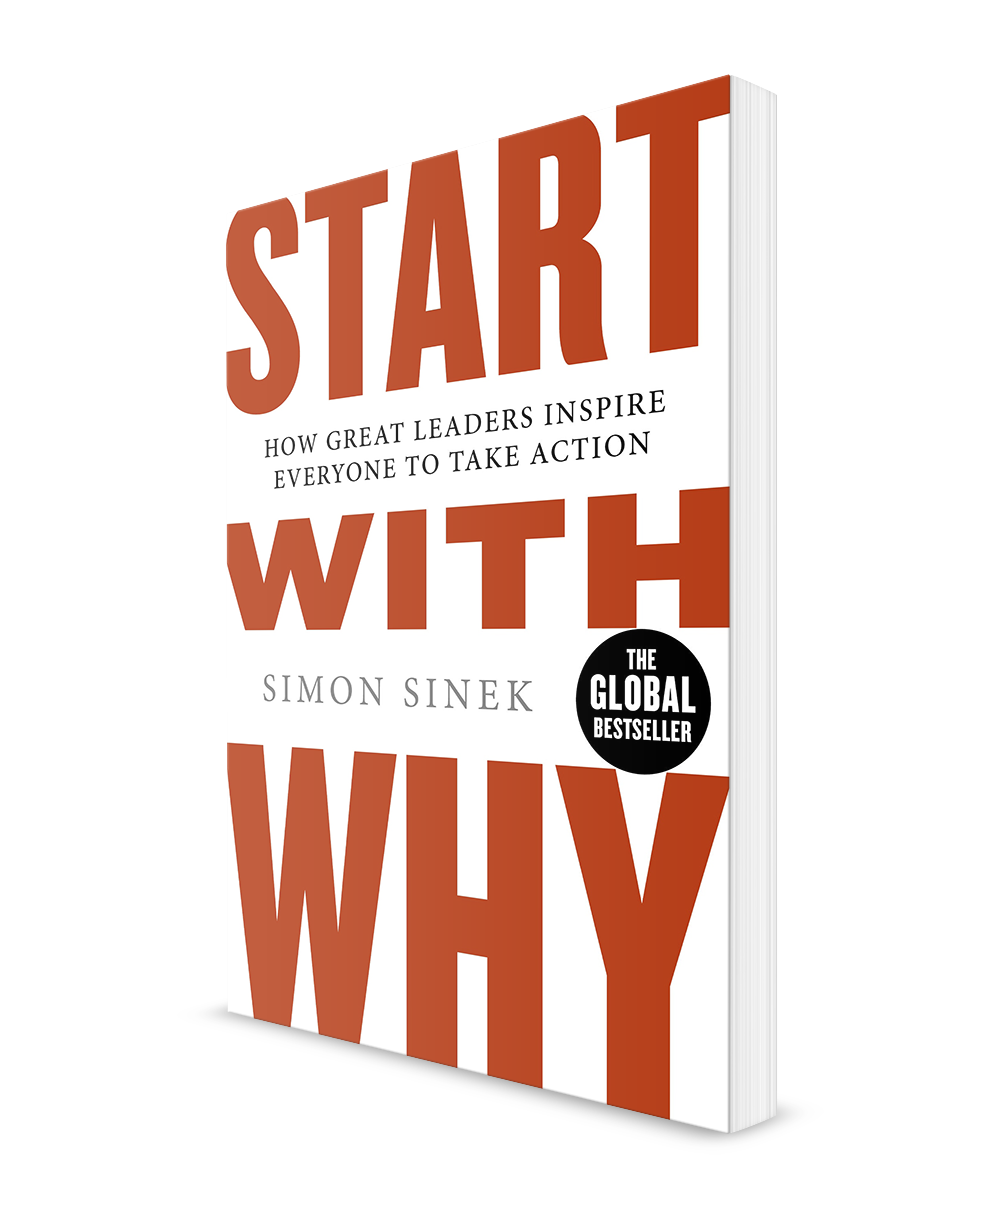 Start with Why instal the new